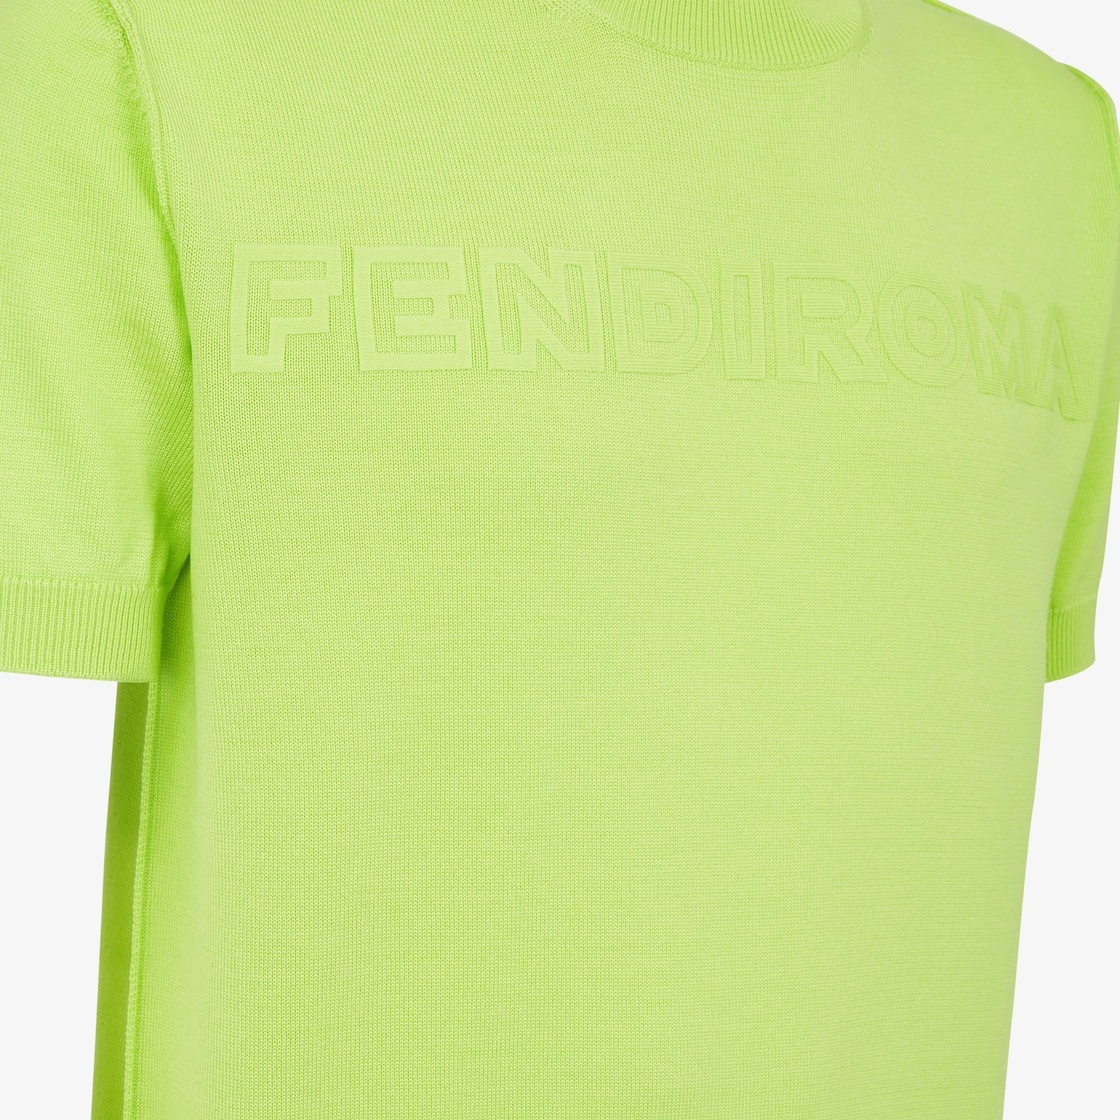 Short-sleeved, crew-neck sweater. Ribbed edges. Part of the Fendi by Marc Jacobs limited edition, th - 3